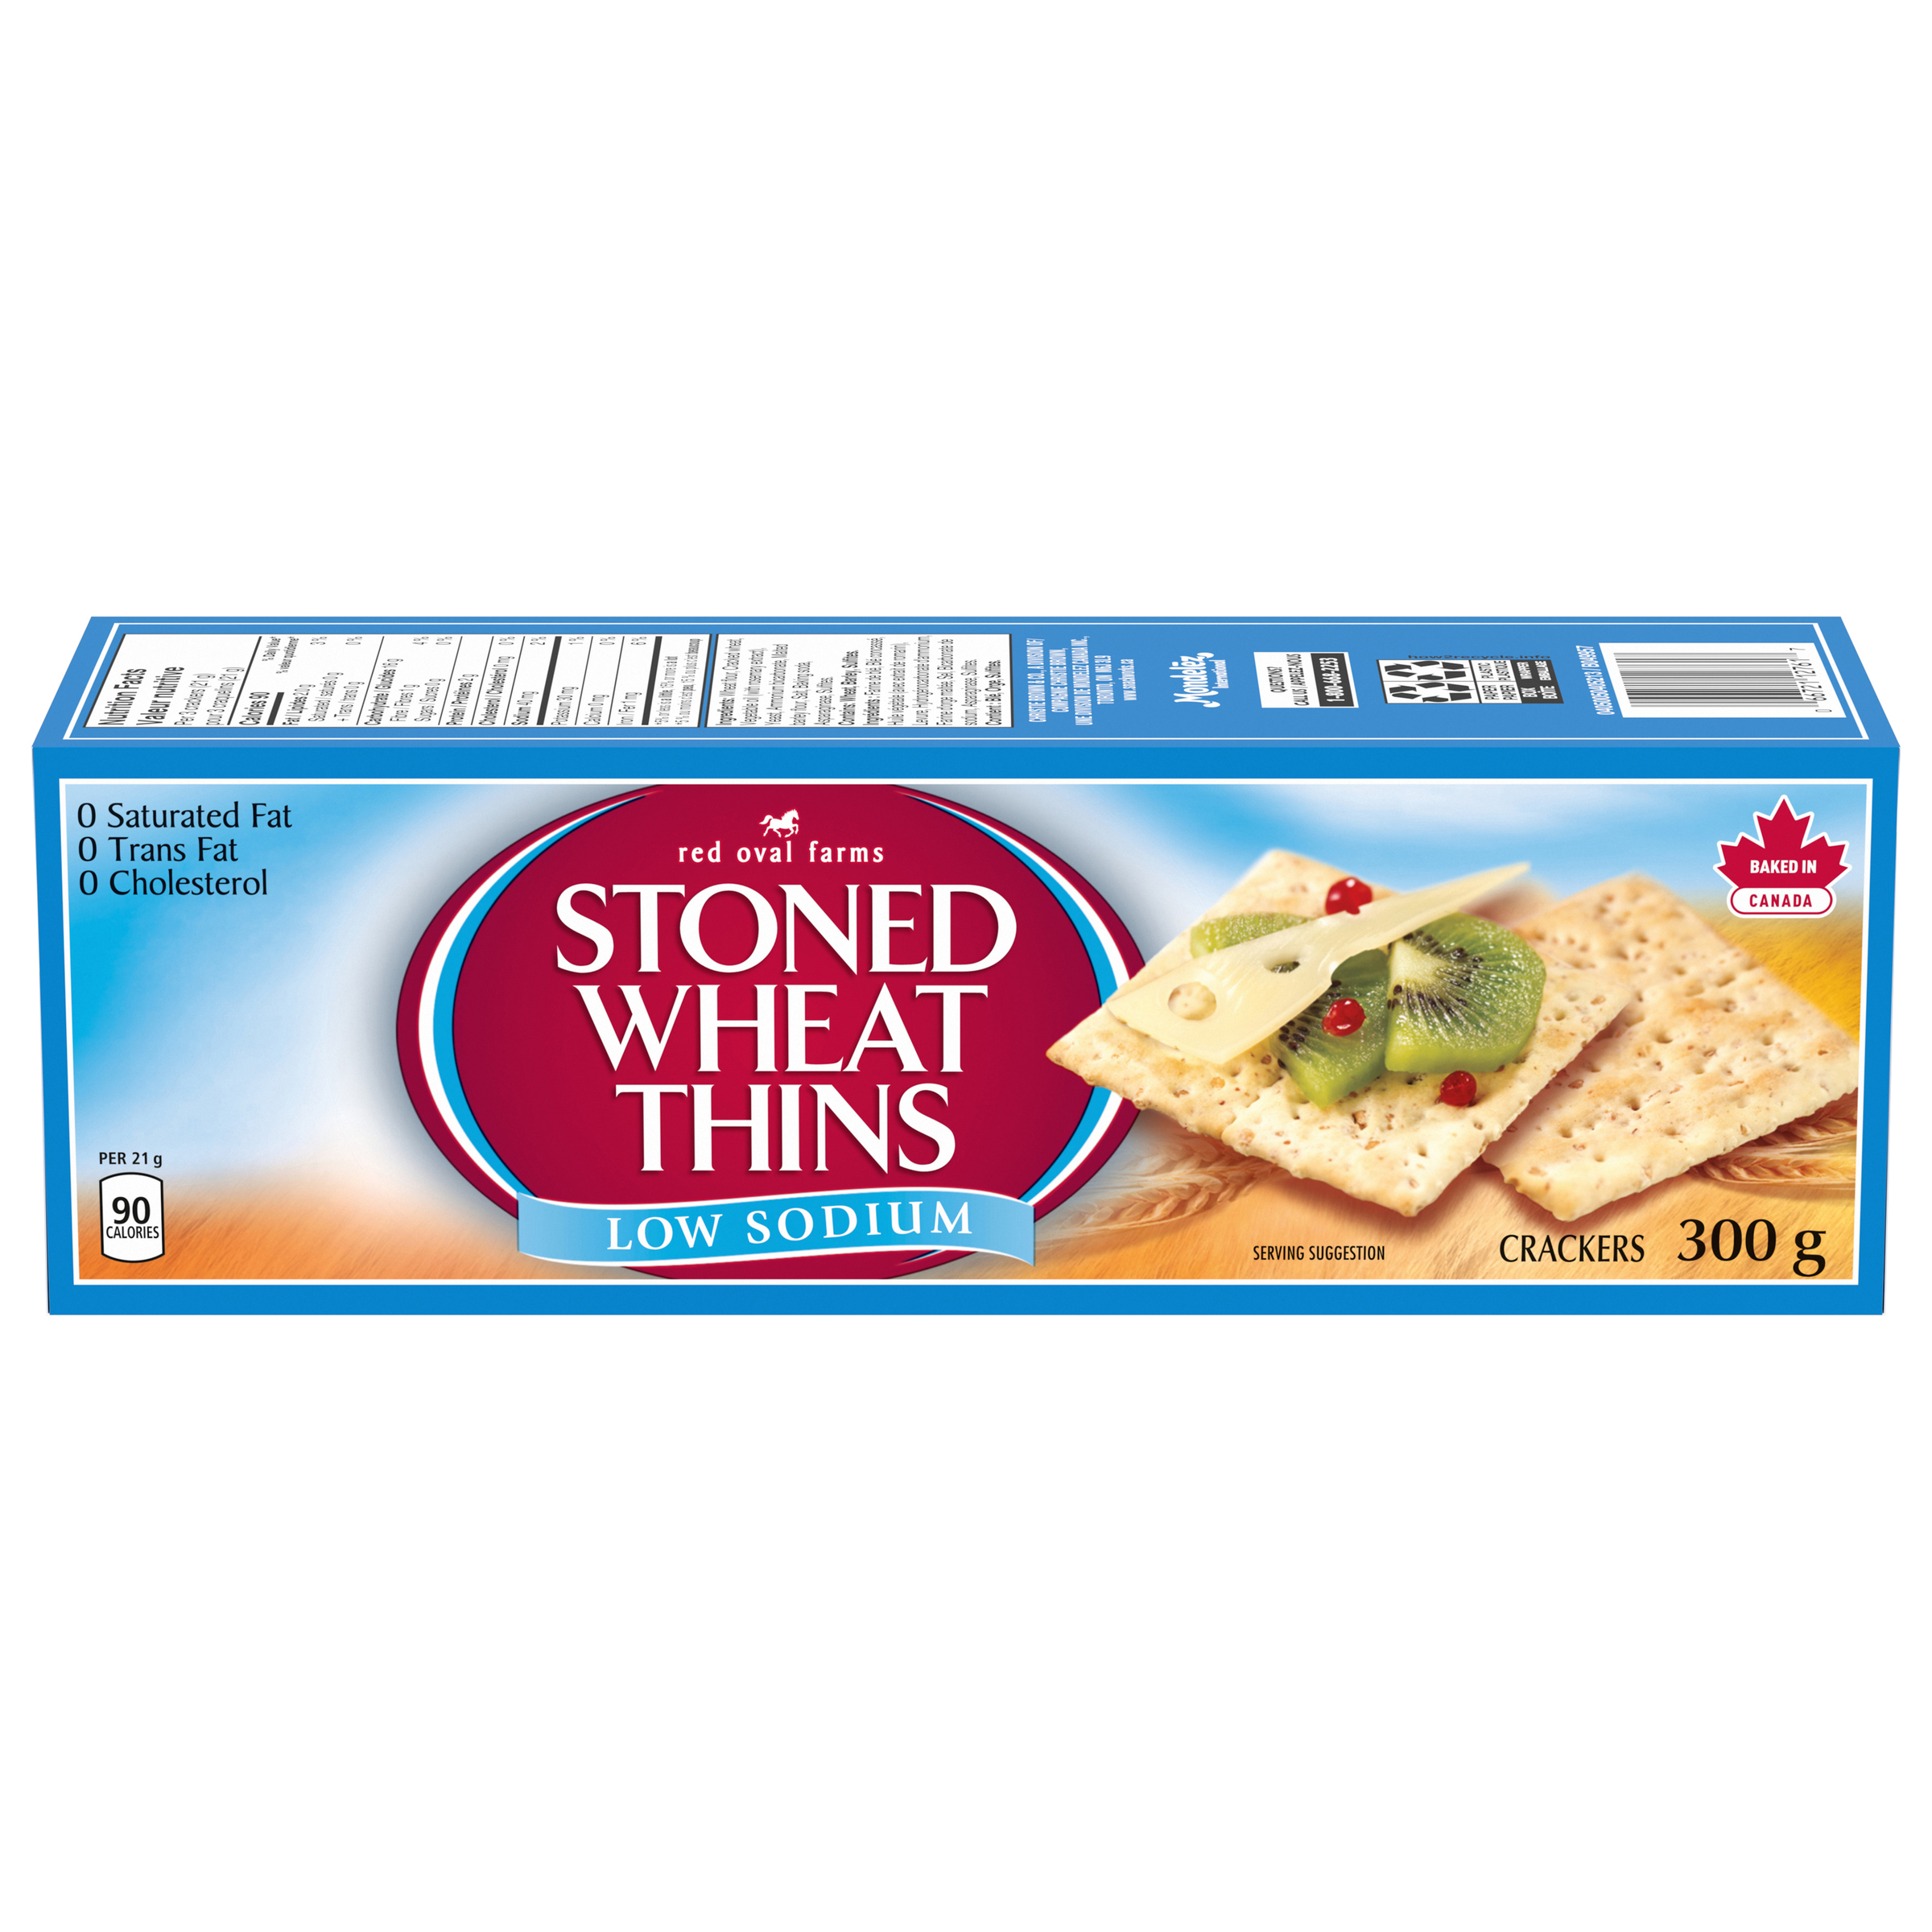 STONED WHEAT THINS Low Sodium Crackers, 300 g